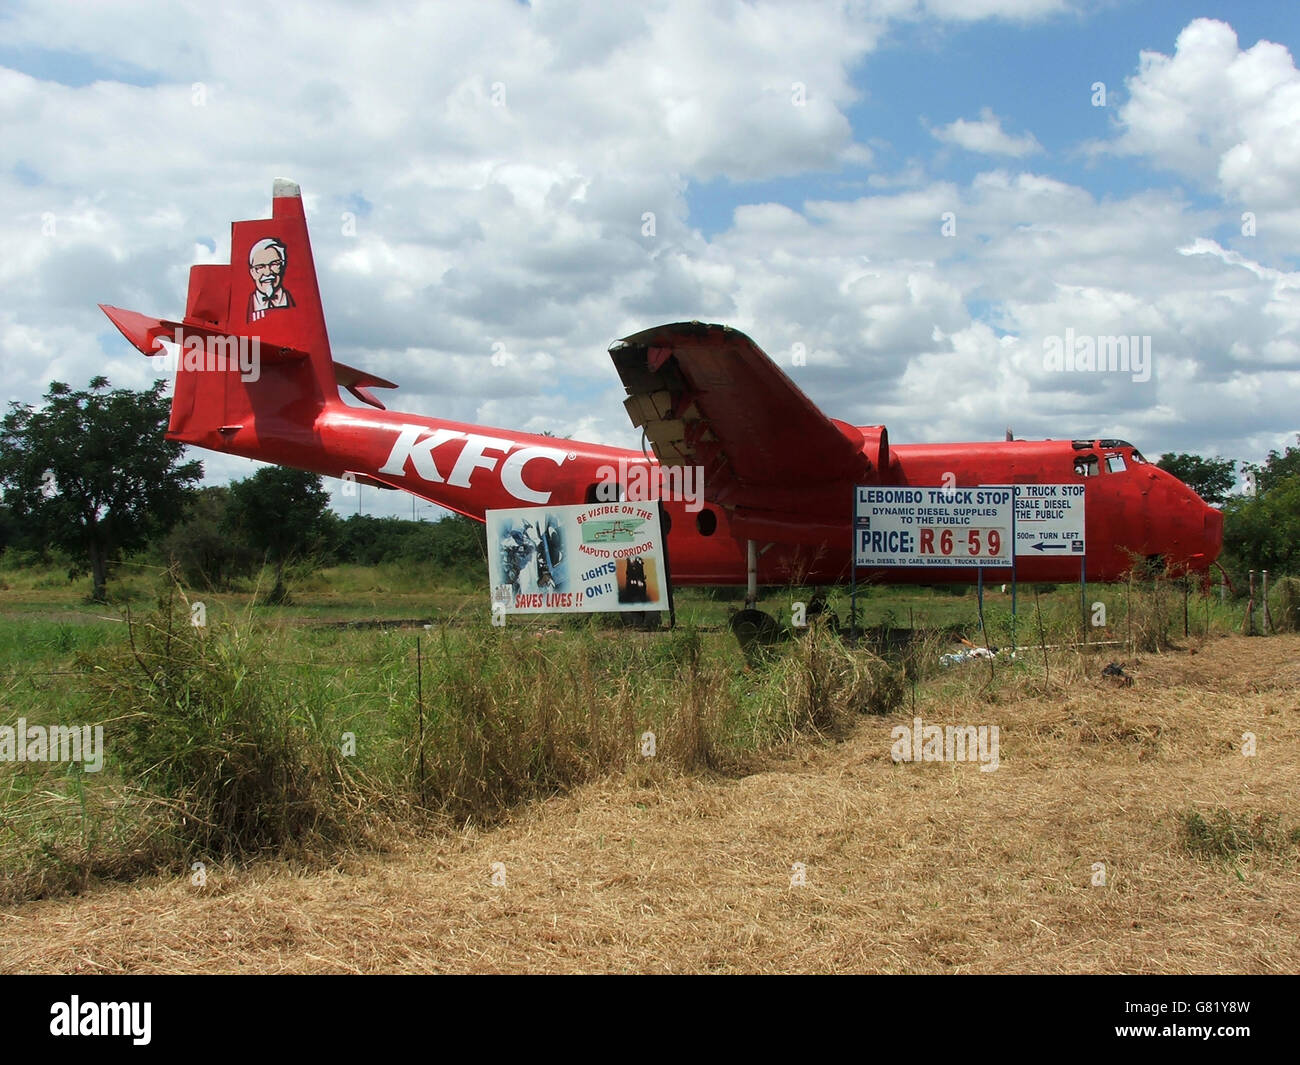 KFC advertisement Aeroplane in meadow, South Africa, 2012 Stock Photo